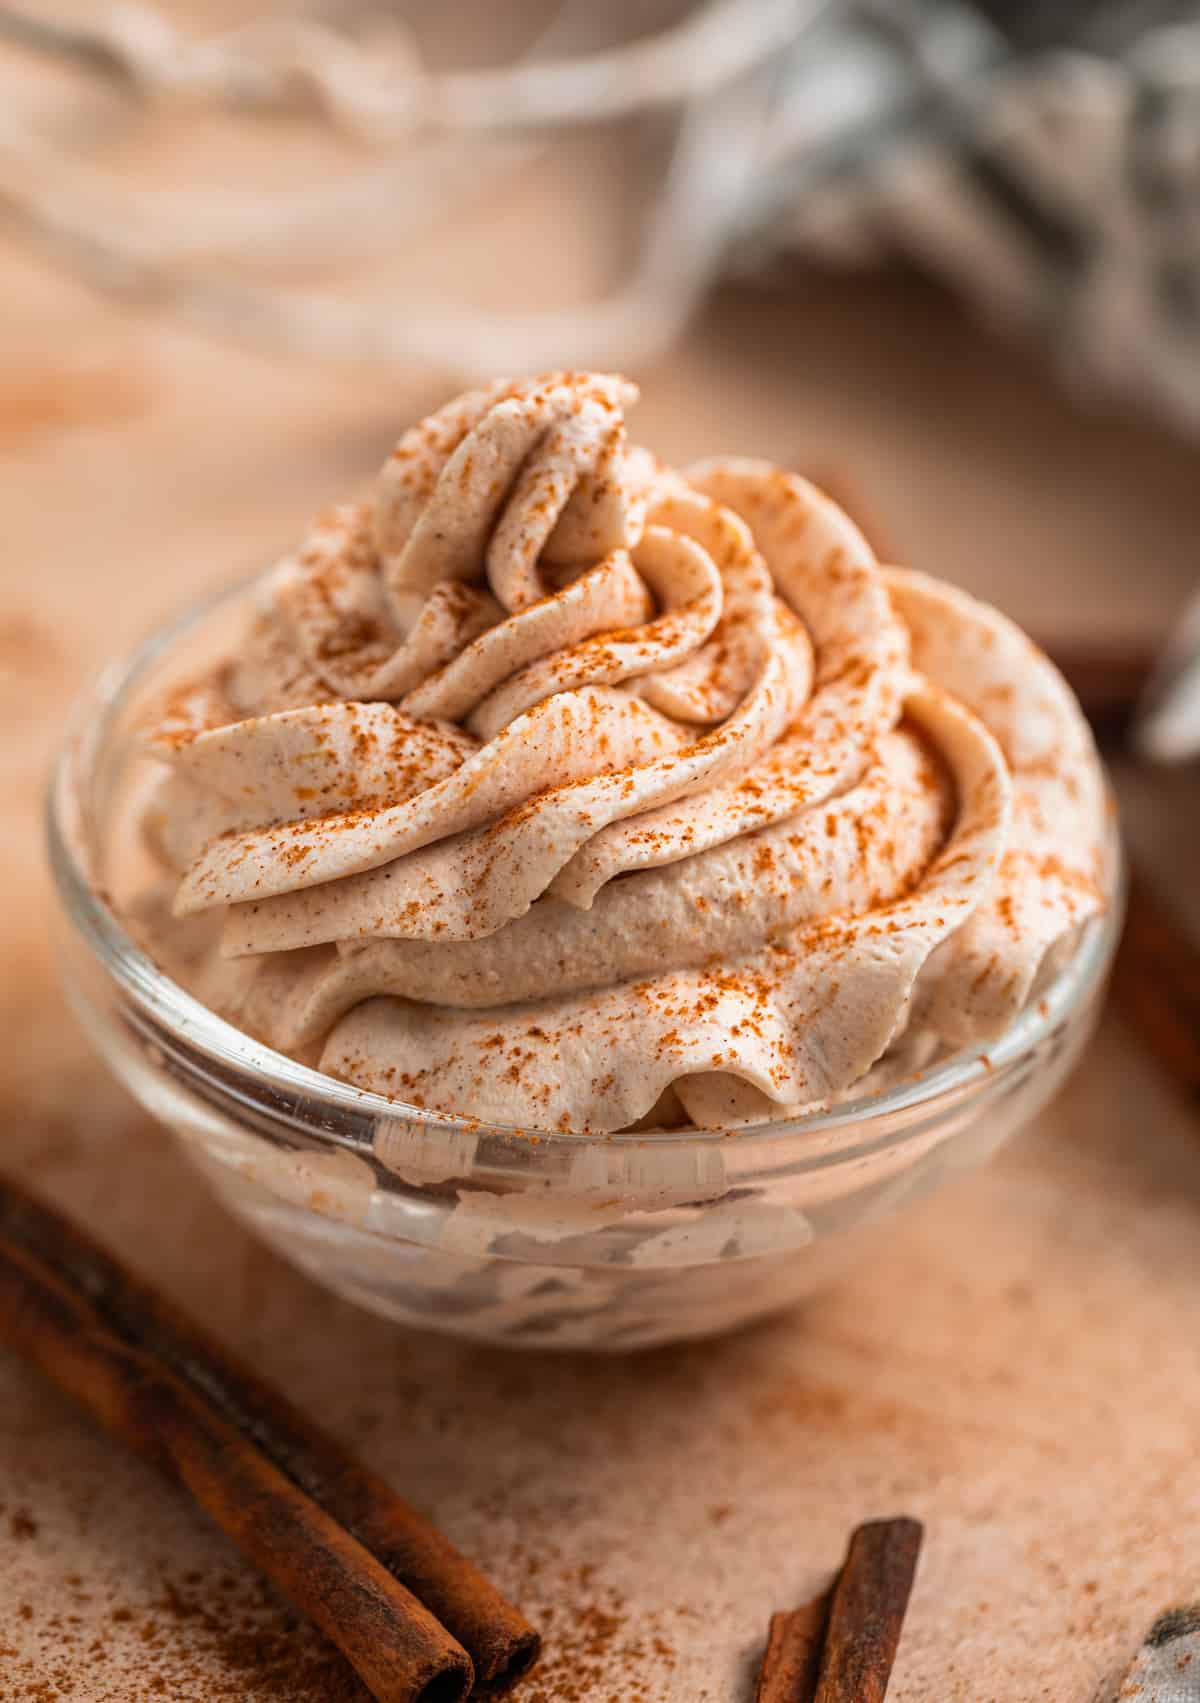 Pumpkin spice whipped cream piped into glass bowl with cinnamon dusted on top and cinnamon sticks beside it.